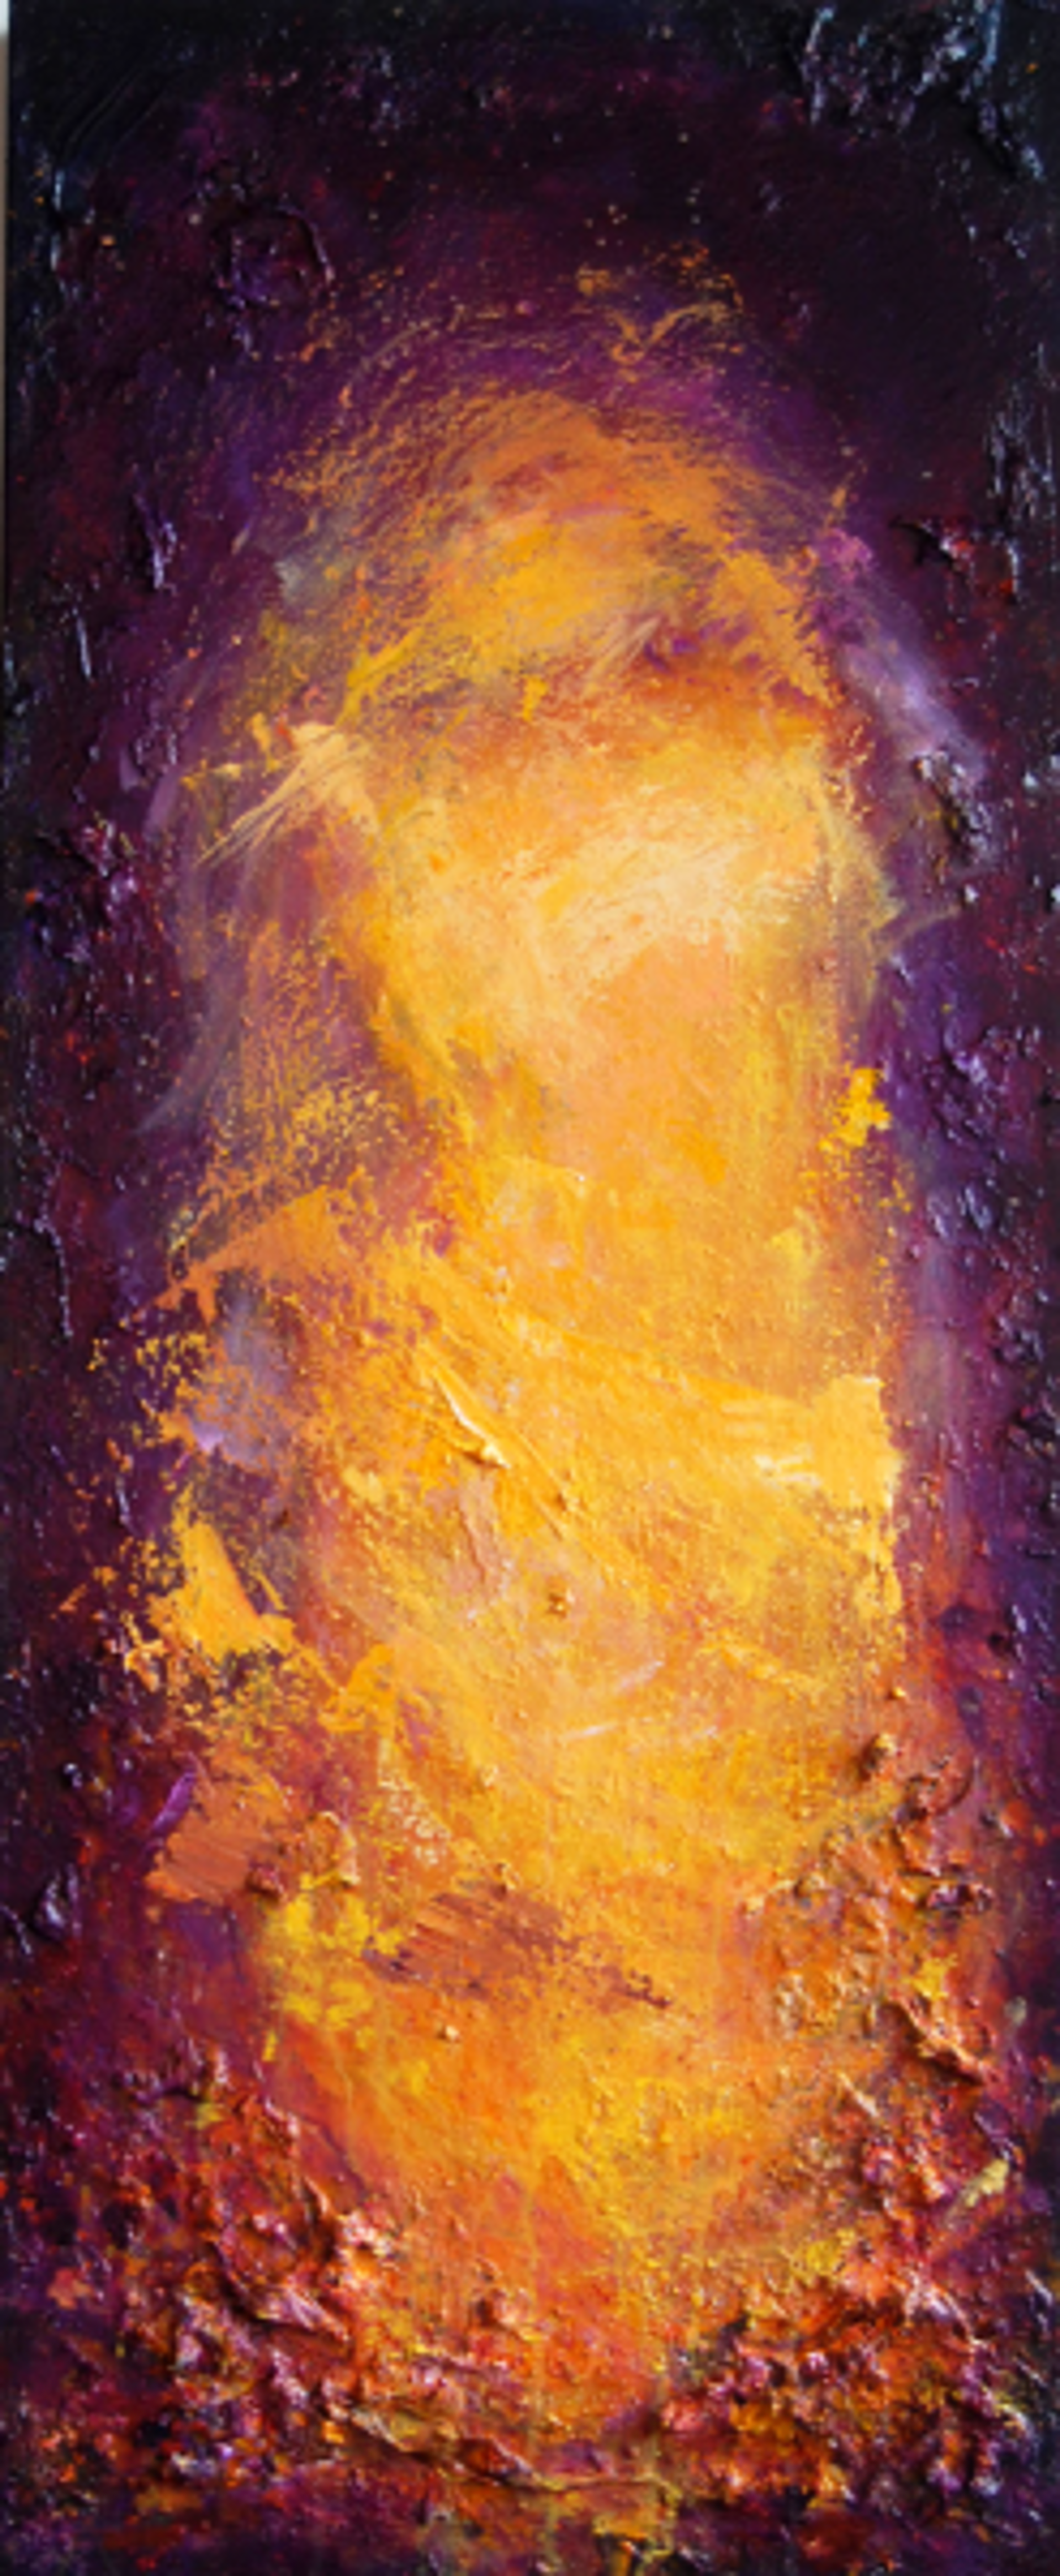 Goddess of the Nebula - (Sold) by Gail Foster